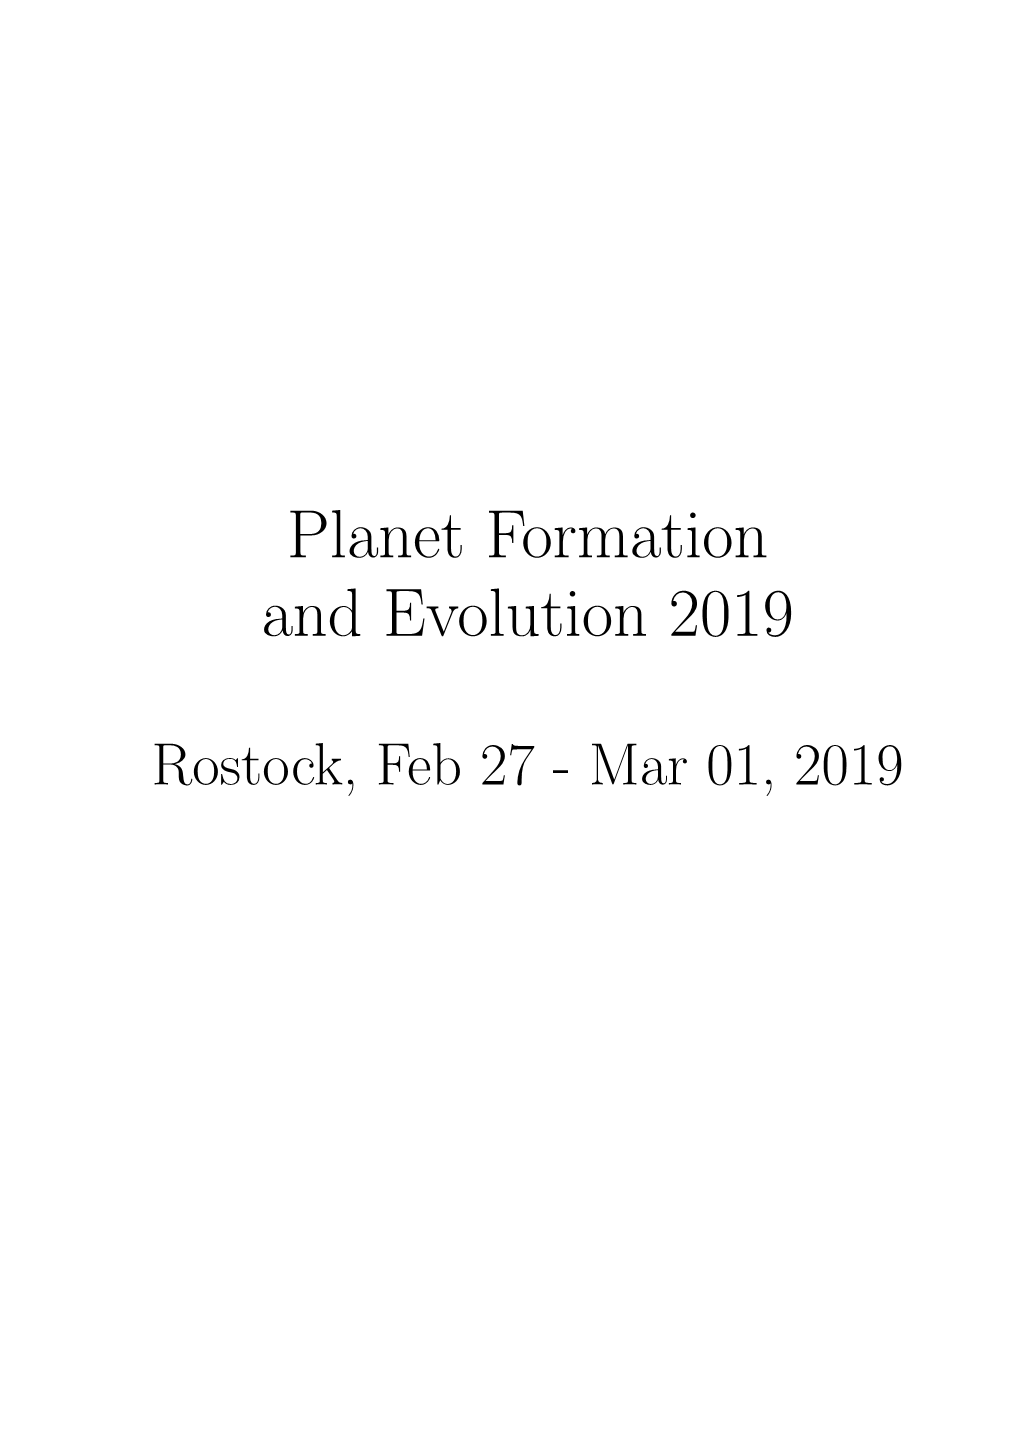 Planet Formation and Evolution 2019